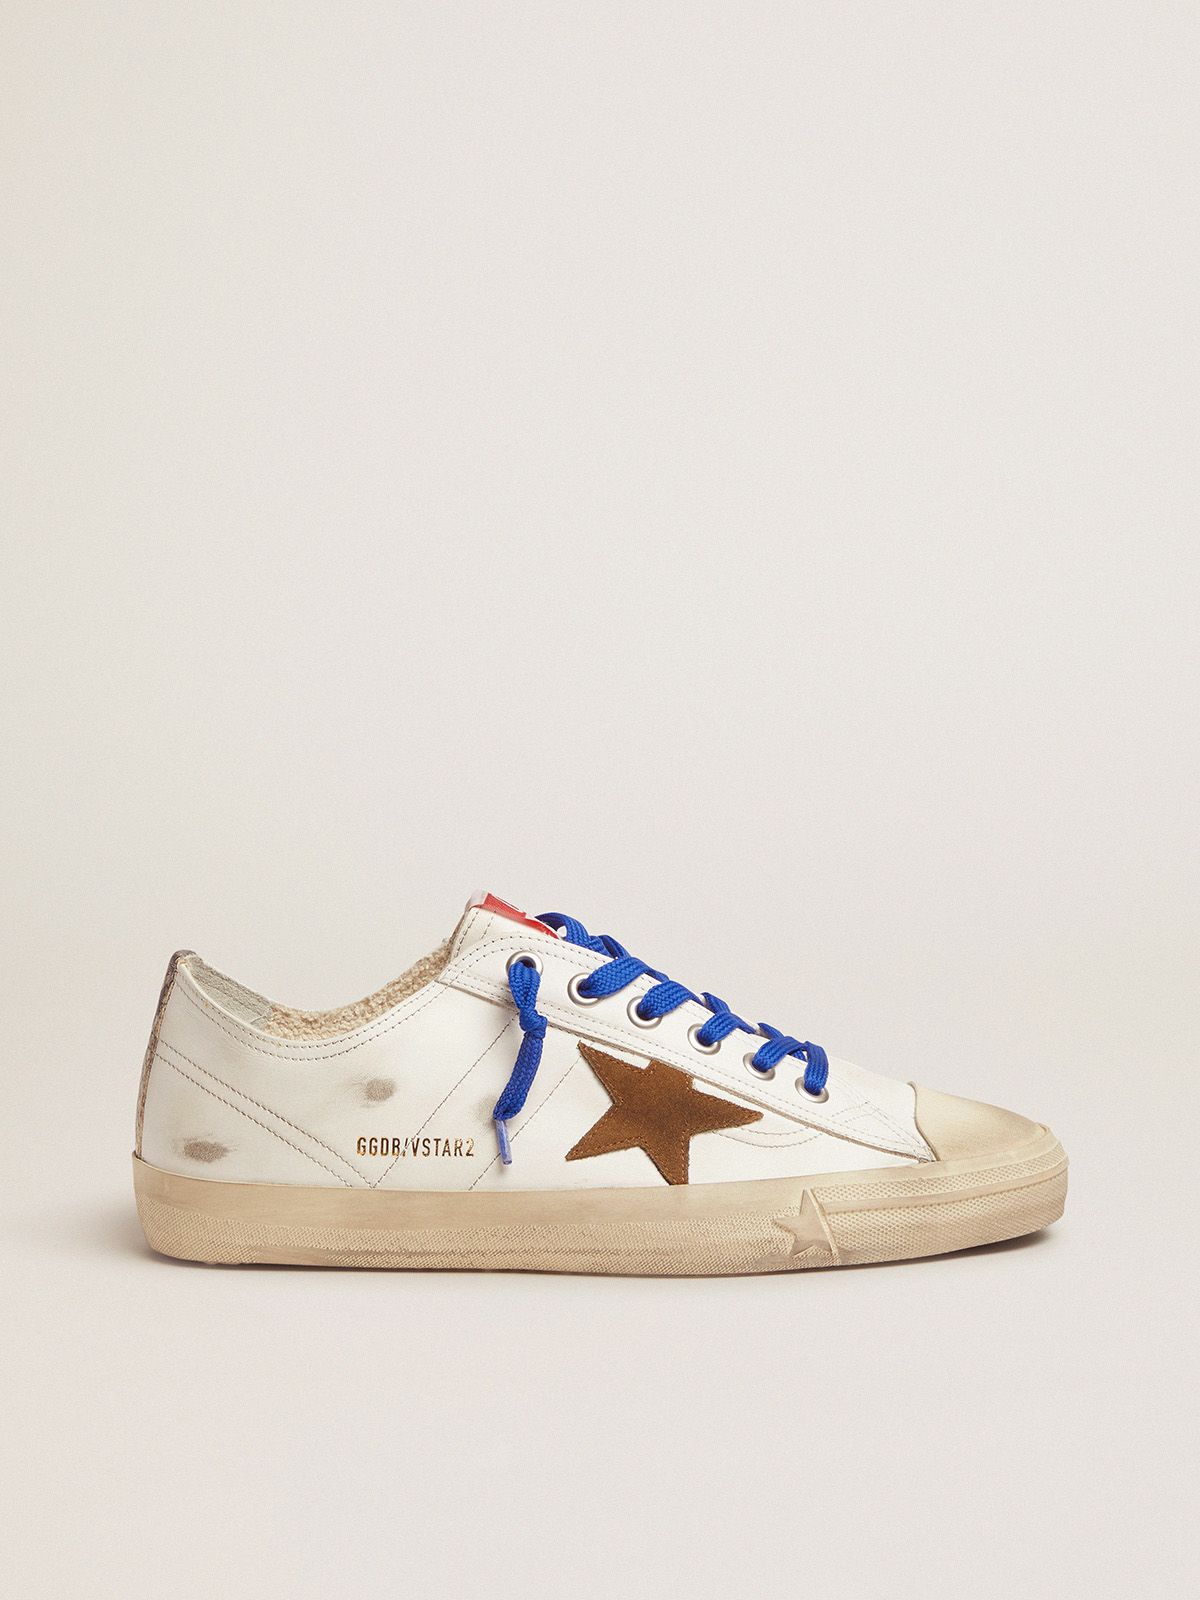 V-Star sneakers LTD with snake-print vertical strip and blue laces